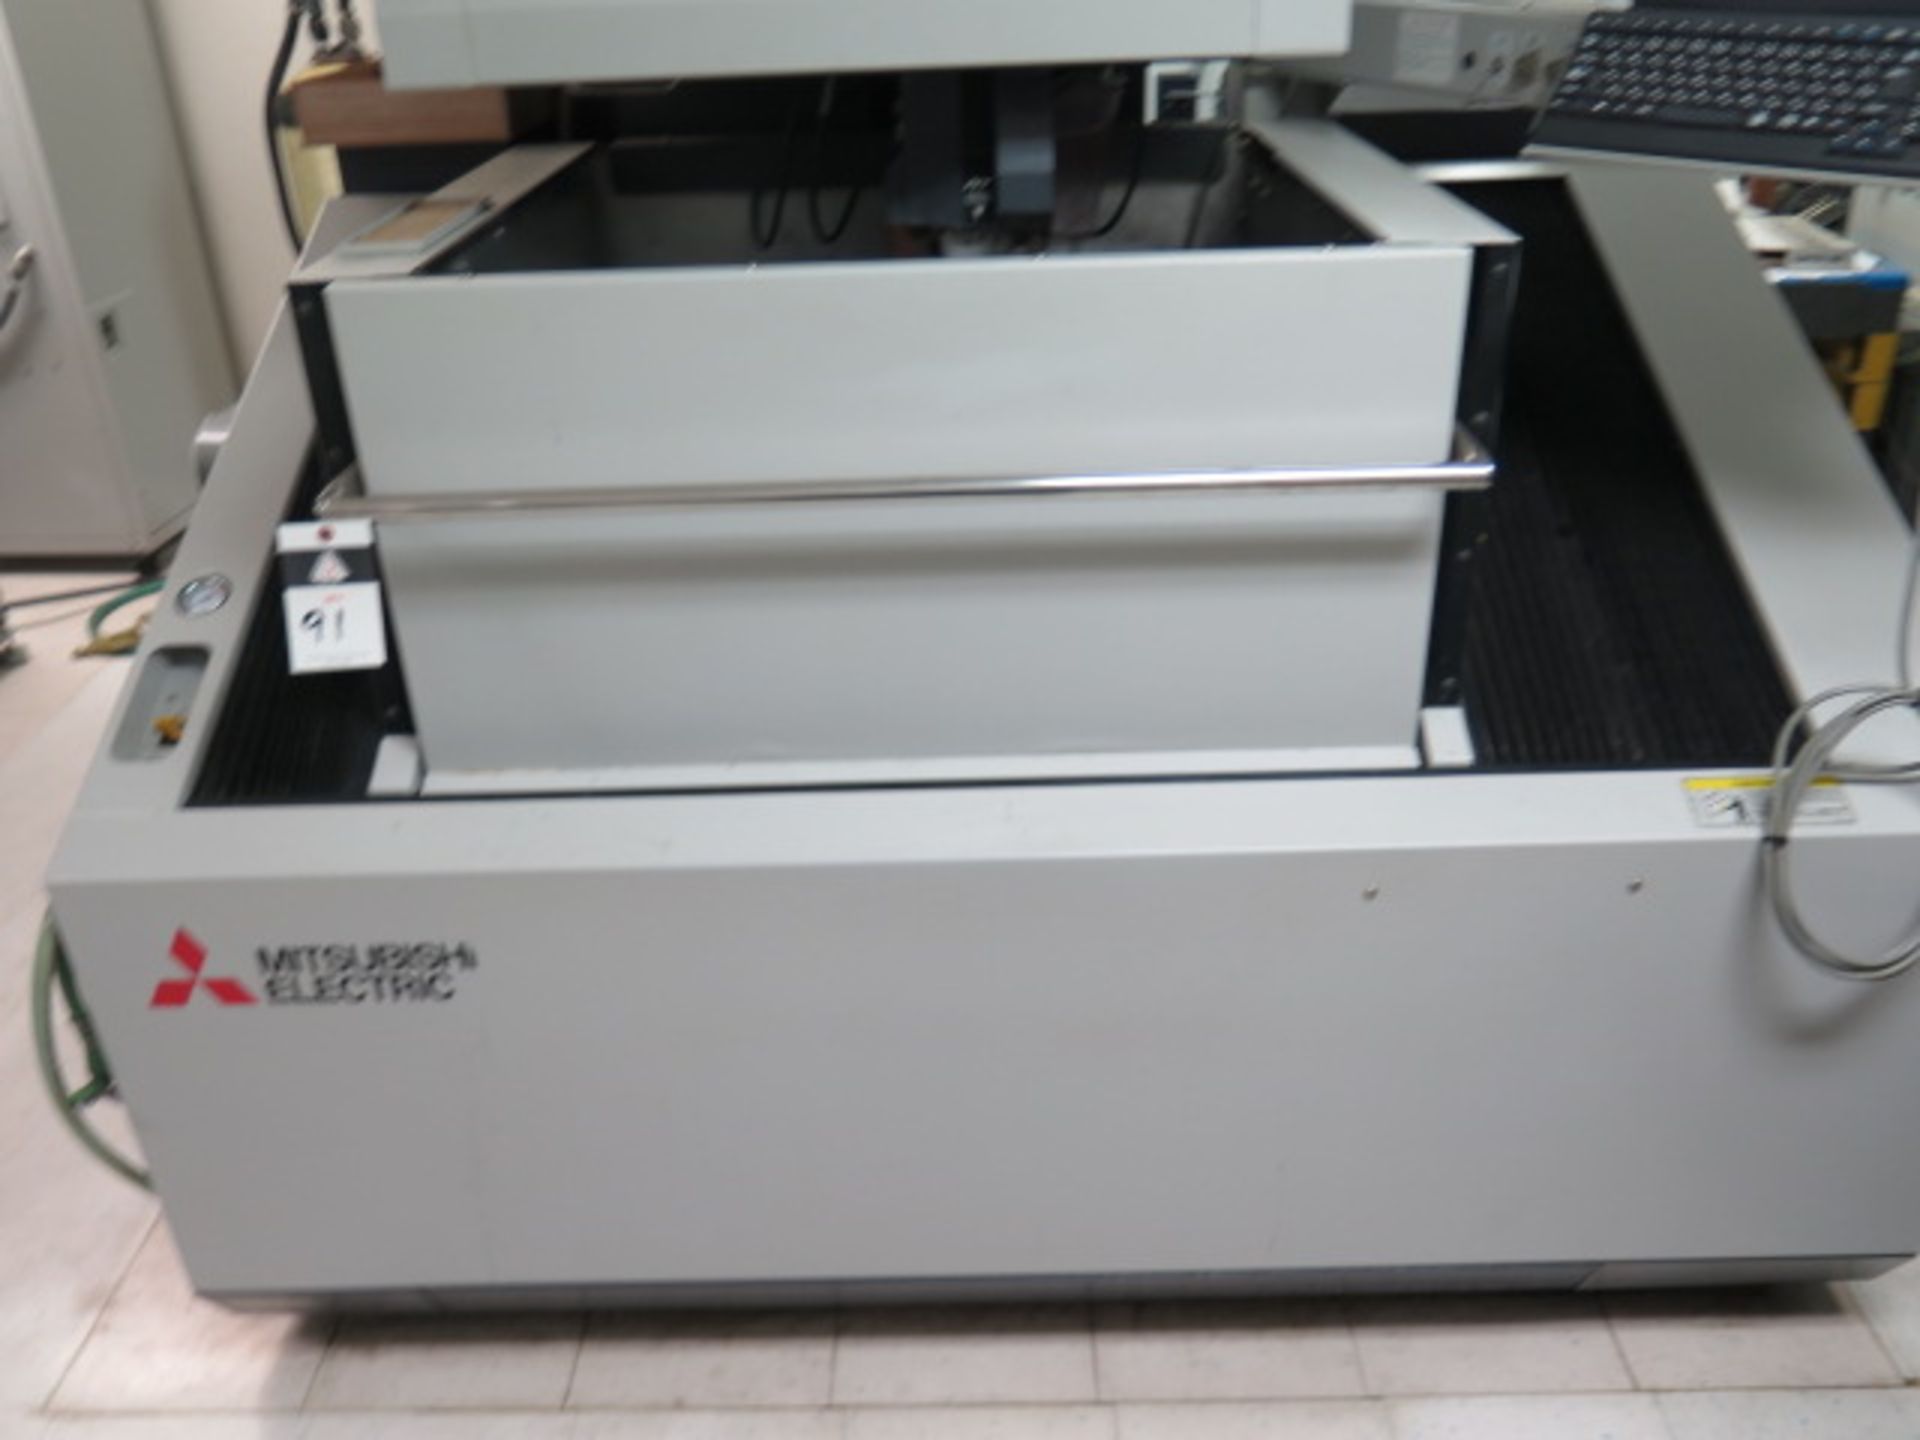 2014 Mitsubishi MD+ PRO III mdl. MV1200S CNC Wire EDM s/n 54D1M091 w/ Mitsubishi M700, SOLD AS IS - Image 5 of 27